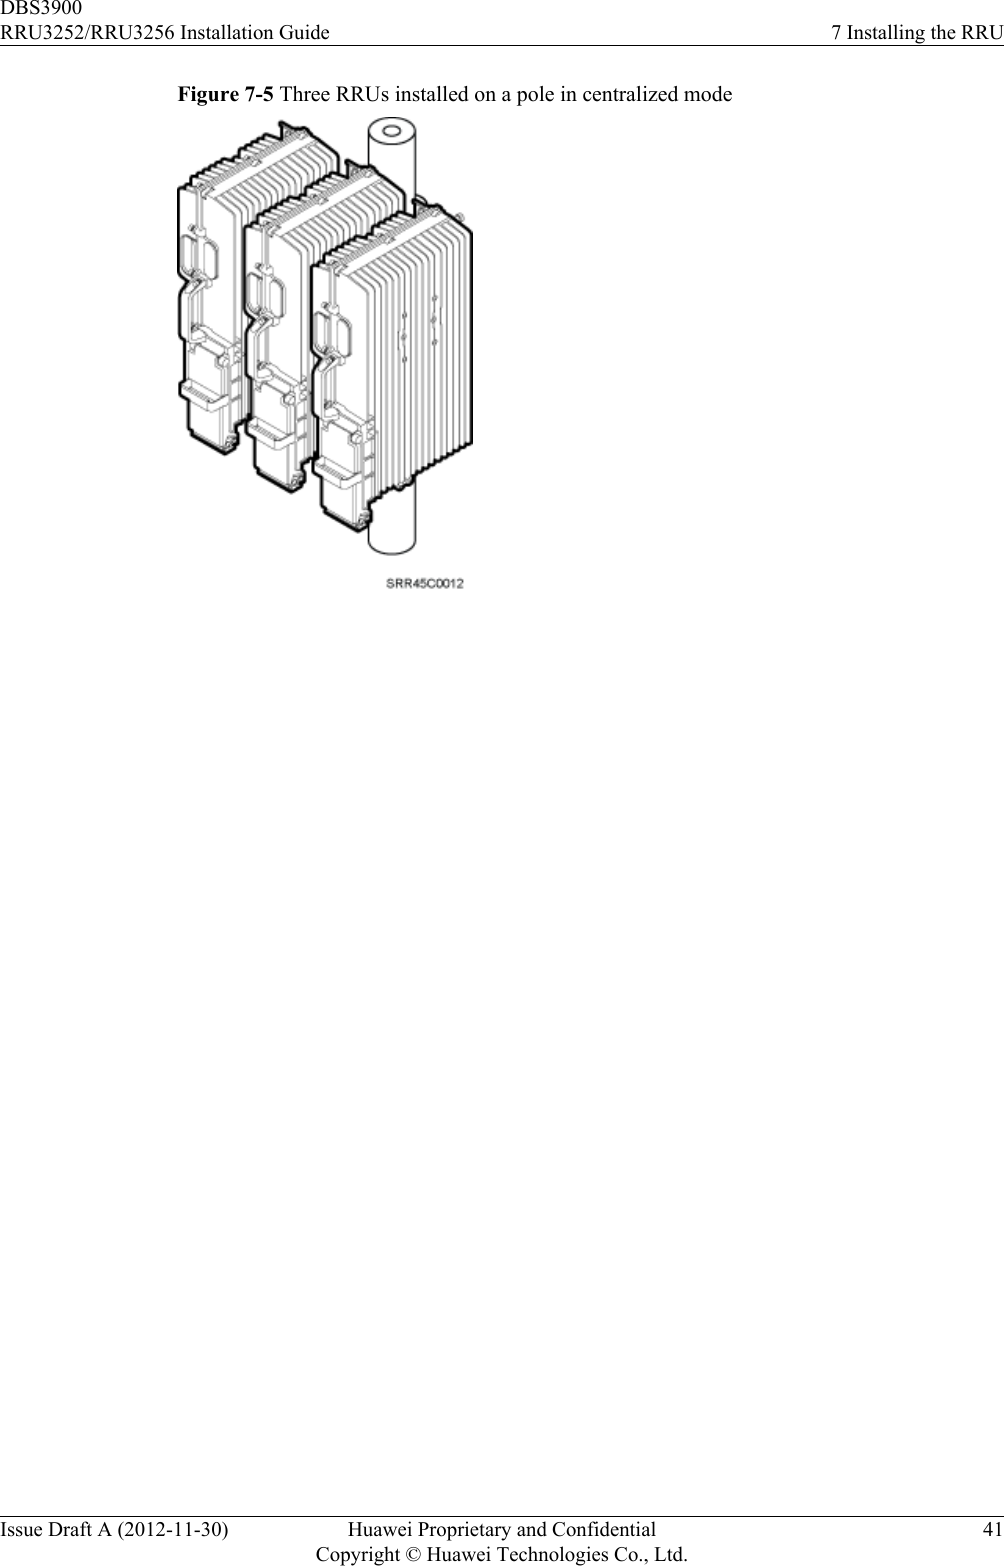 Figure 7-5 Three RRUs installed on a pole in centralized mode DBS3900RRU3252/RRU3256 Installation Guide 7 Installing the RRUIssue Draft A (2012-11-30) Huawei Proprietary and ConfidentialCopyright © Huawei Technologies Co., Ltd.41